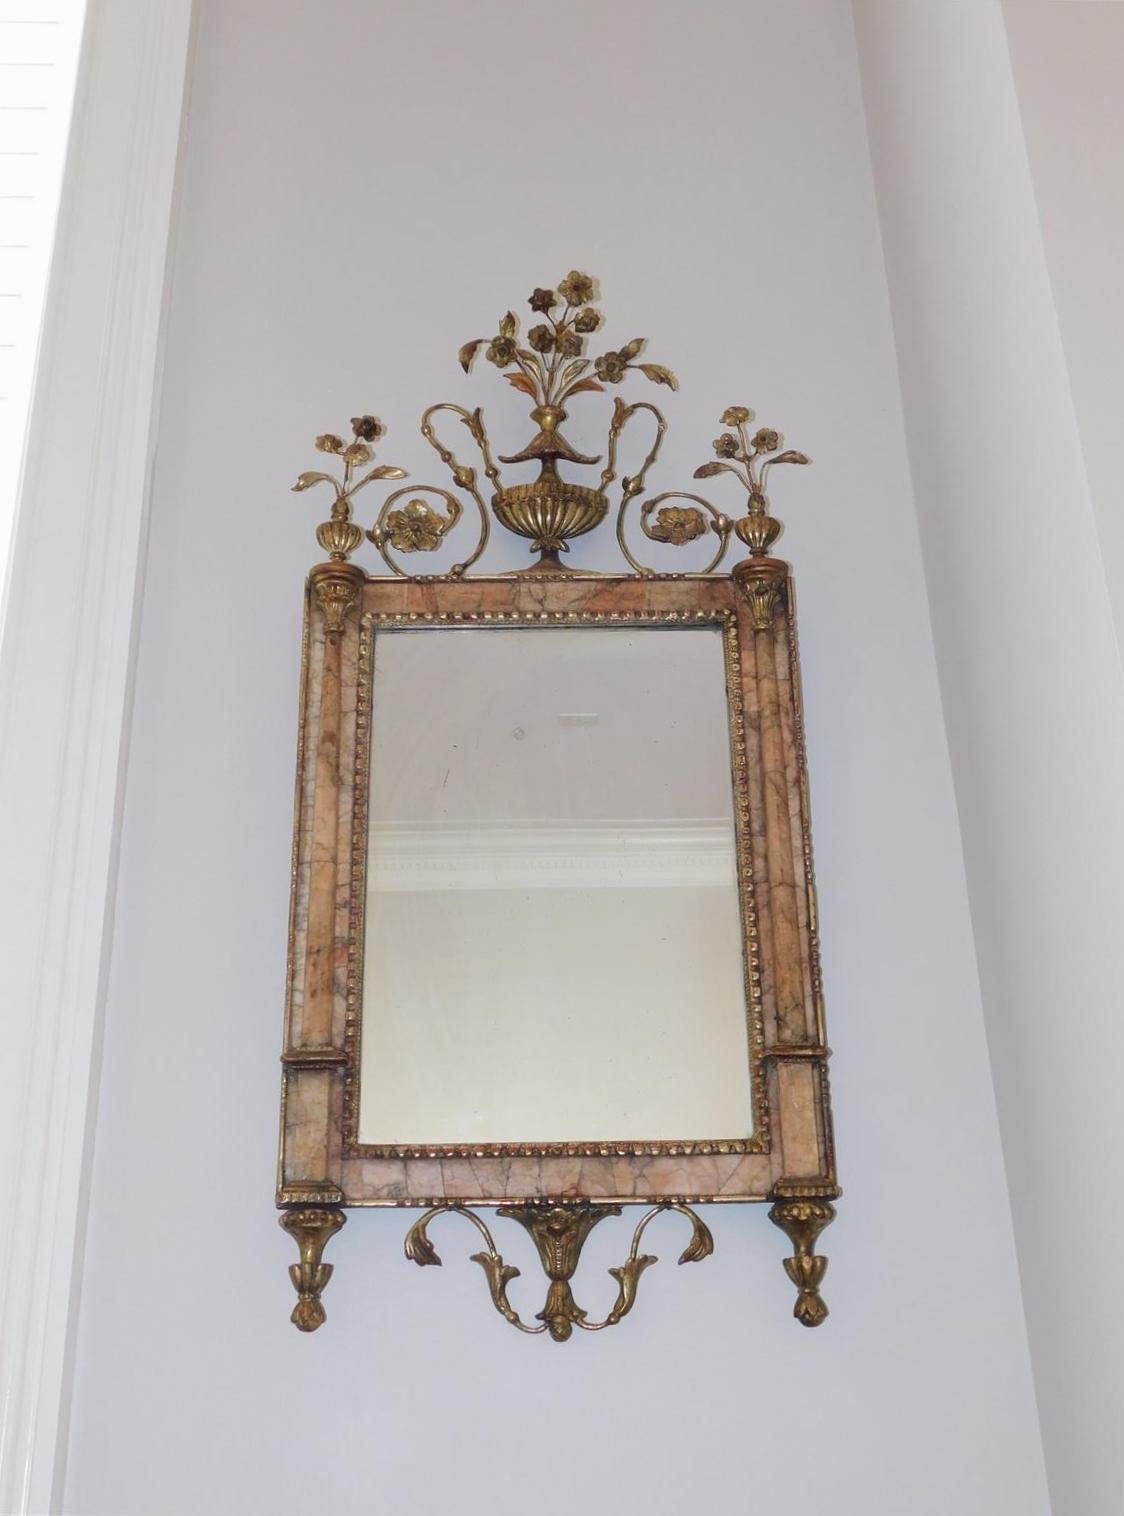 Italian Neoclassical Bilboa marble and gilt wood foliage urn wall mirror. Mirror retains the original silvered glass and wood backing, Late 18th century